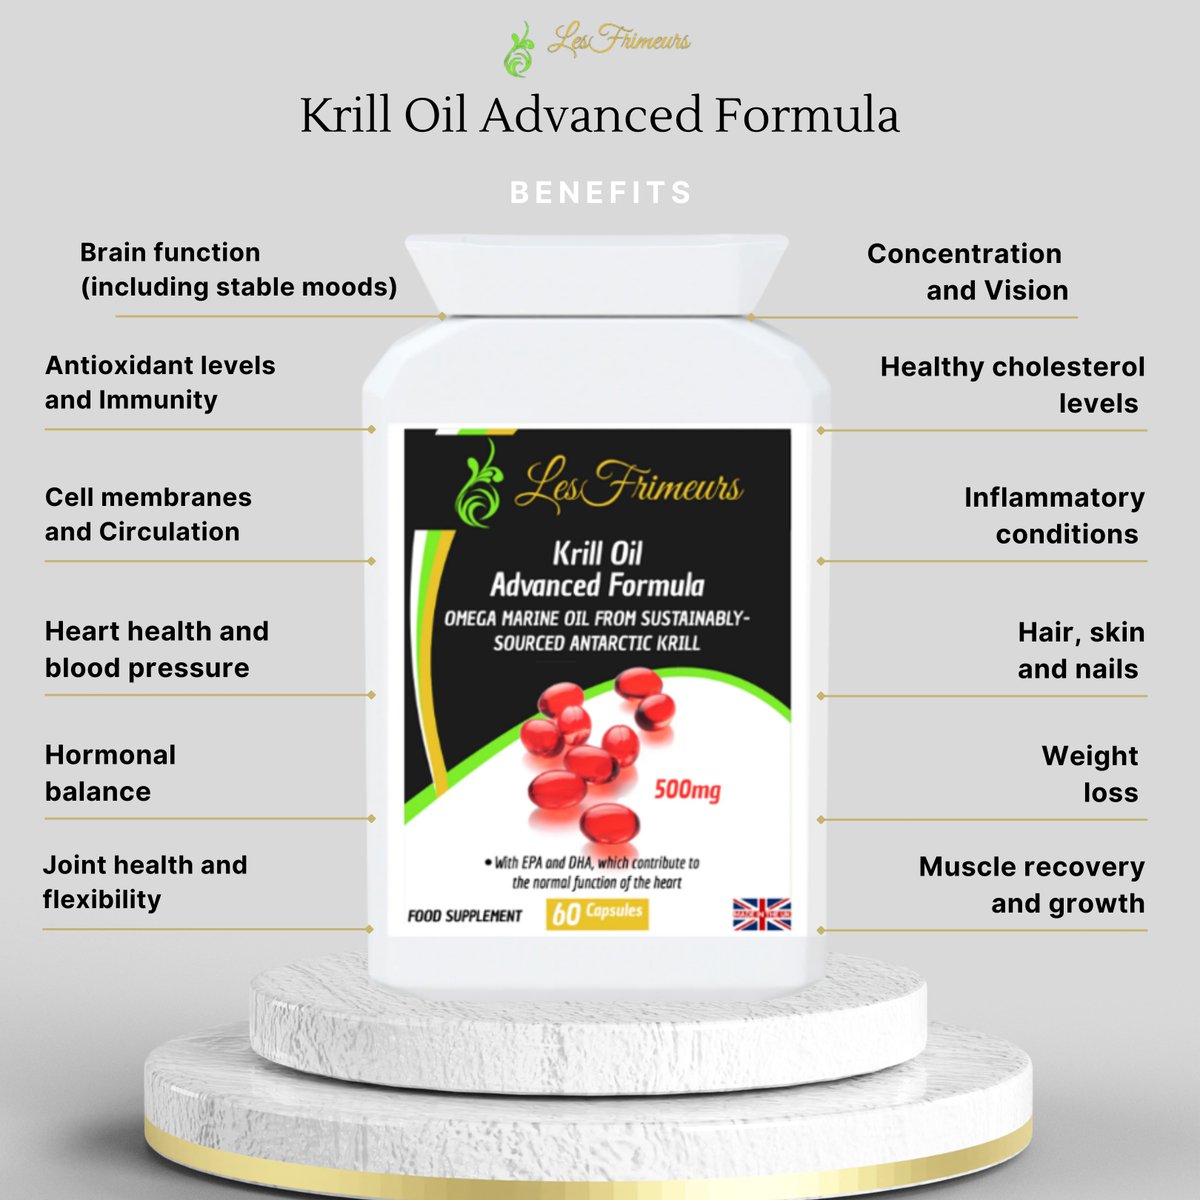 Krill oil. #lesfrimeurs #doctorsays
#Brainfunction #Antioxidantlevels #Immunity #Hearthealthandbloodpressure #Circulation #Hormonalbalance #jointhealthandflexibility #Concentration #Inflammatoryconditions #Hairskinnails #Weightloss #Musclerecovery